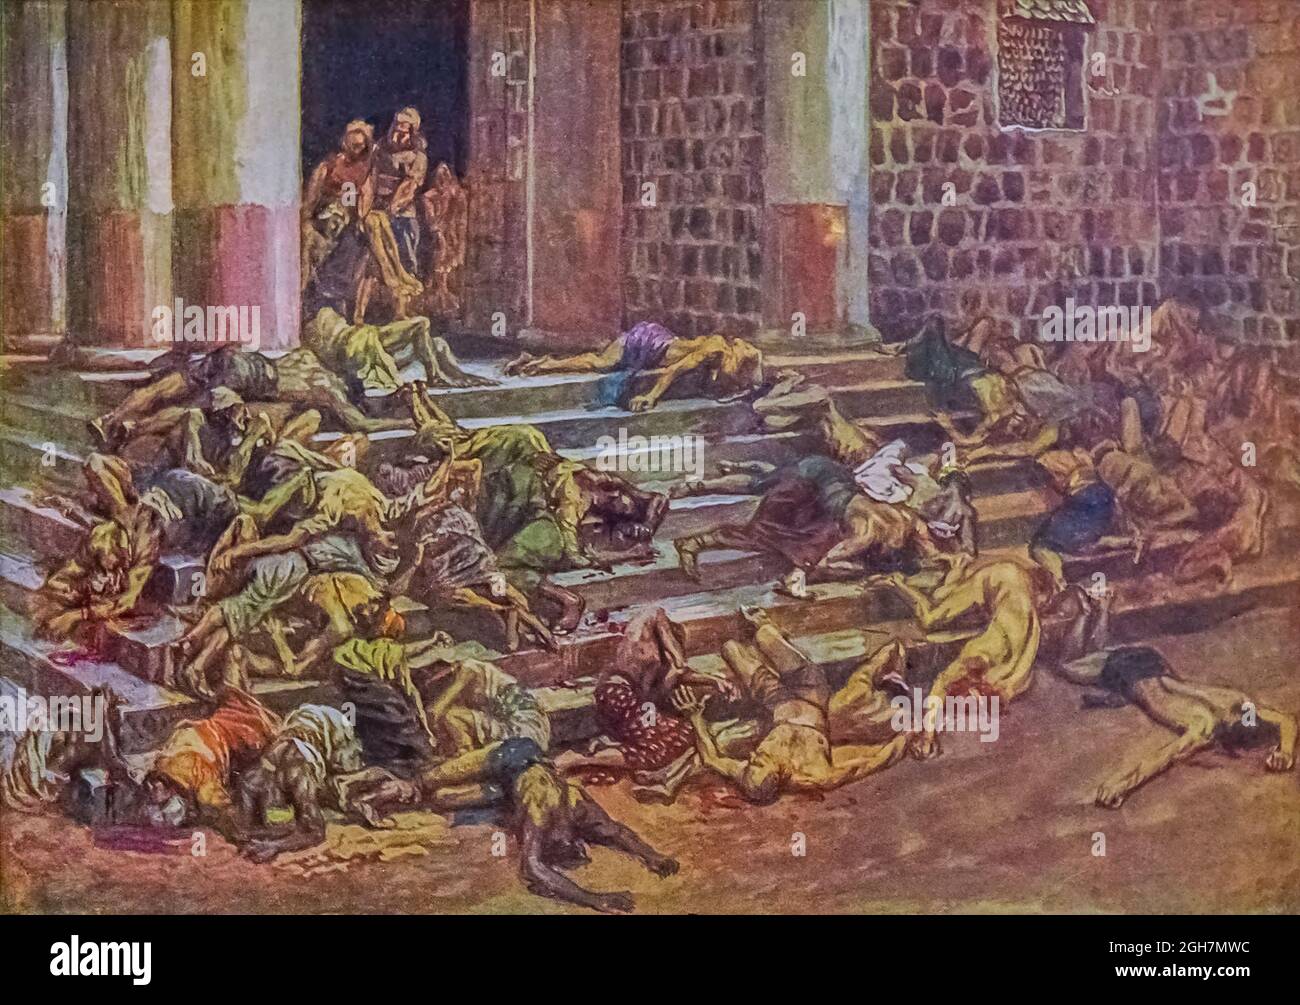 THE DEAD BODIES THROWN OUTSIDE THE TEMPLE. II Kings x. 25. “And it came to pass, as soon as he had made an end of offering the burnt offering, that Jehu said to the guard and to the captains, Go in, and slay them; let none come forth. And they smote them with the edge of the sword; and the guard and the captains cast them out, and went to the city of the house of Baal. From the book ' The Old Testament : three hundred and ninety-six compositions illustrating the Old Testament ' Part II by J. James Tissot Published by M. de Brunoff in Paris, London and New York in 1904 Stock Photo